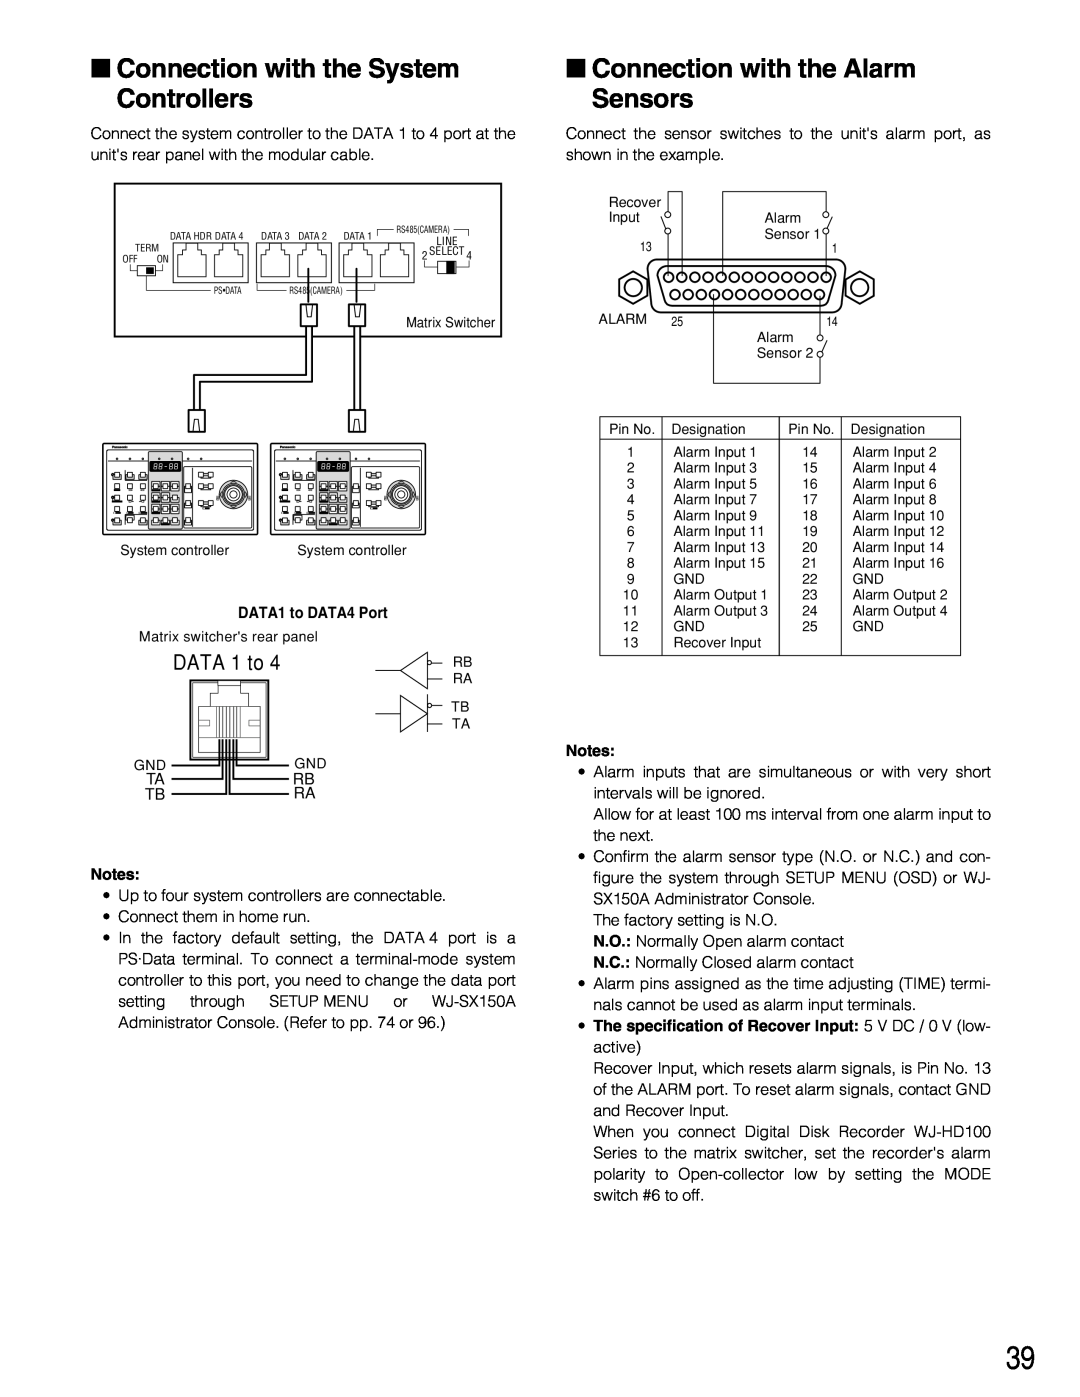 Panasonic WJ-SX150A manual Connection with the System, Connection with the Alarm, Controllers, Sensors, DATA 1 to 